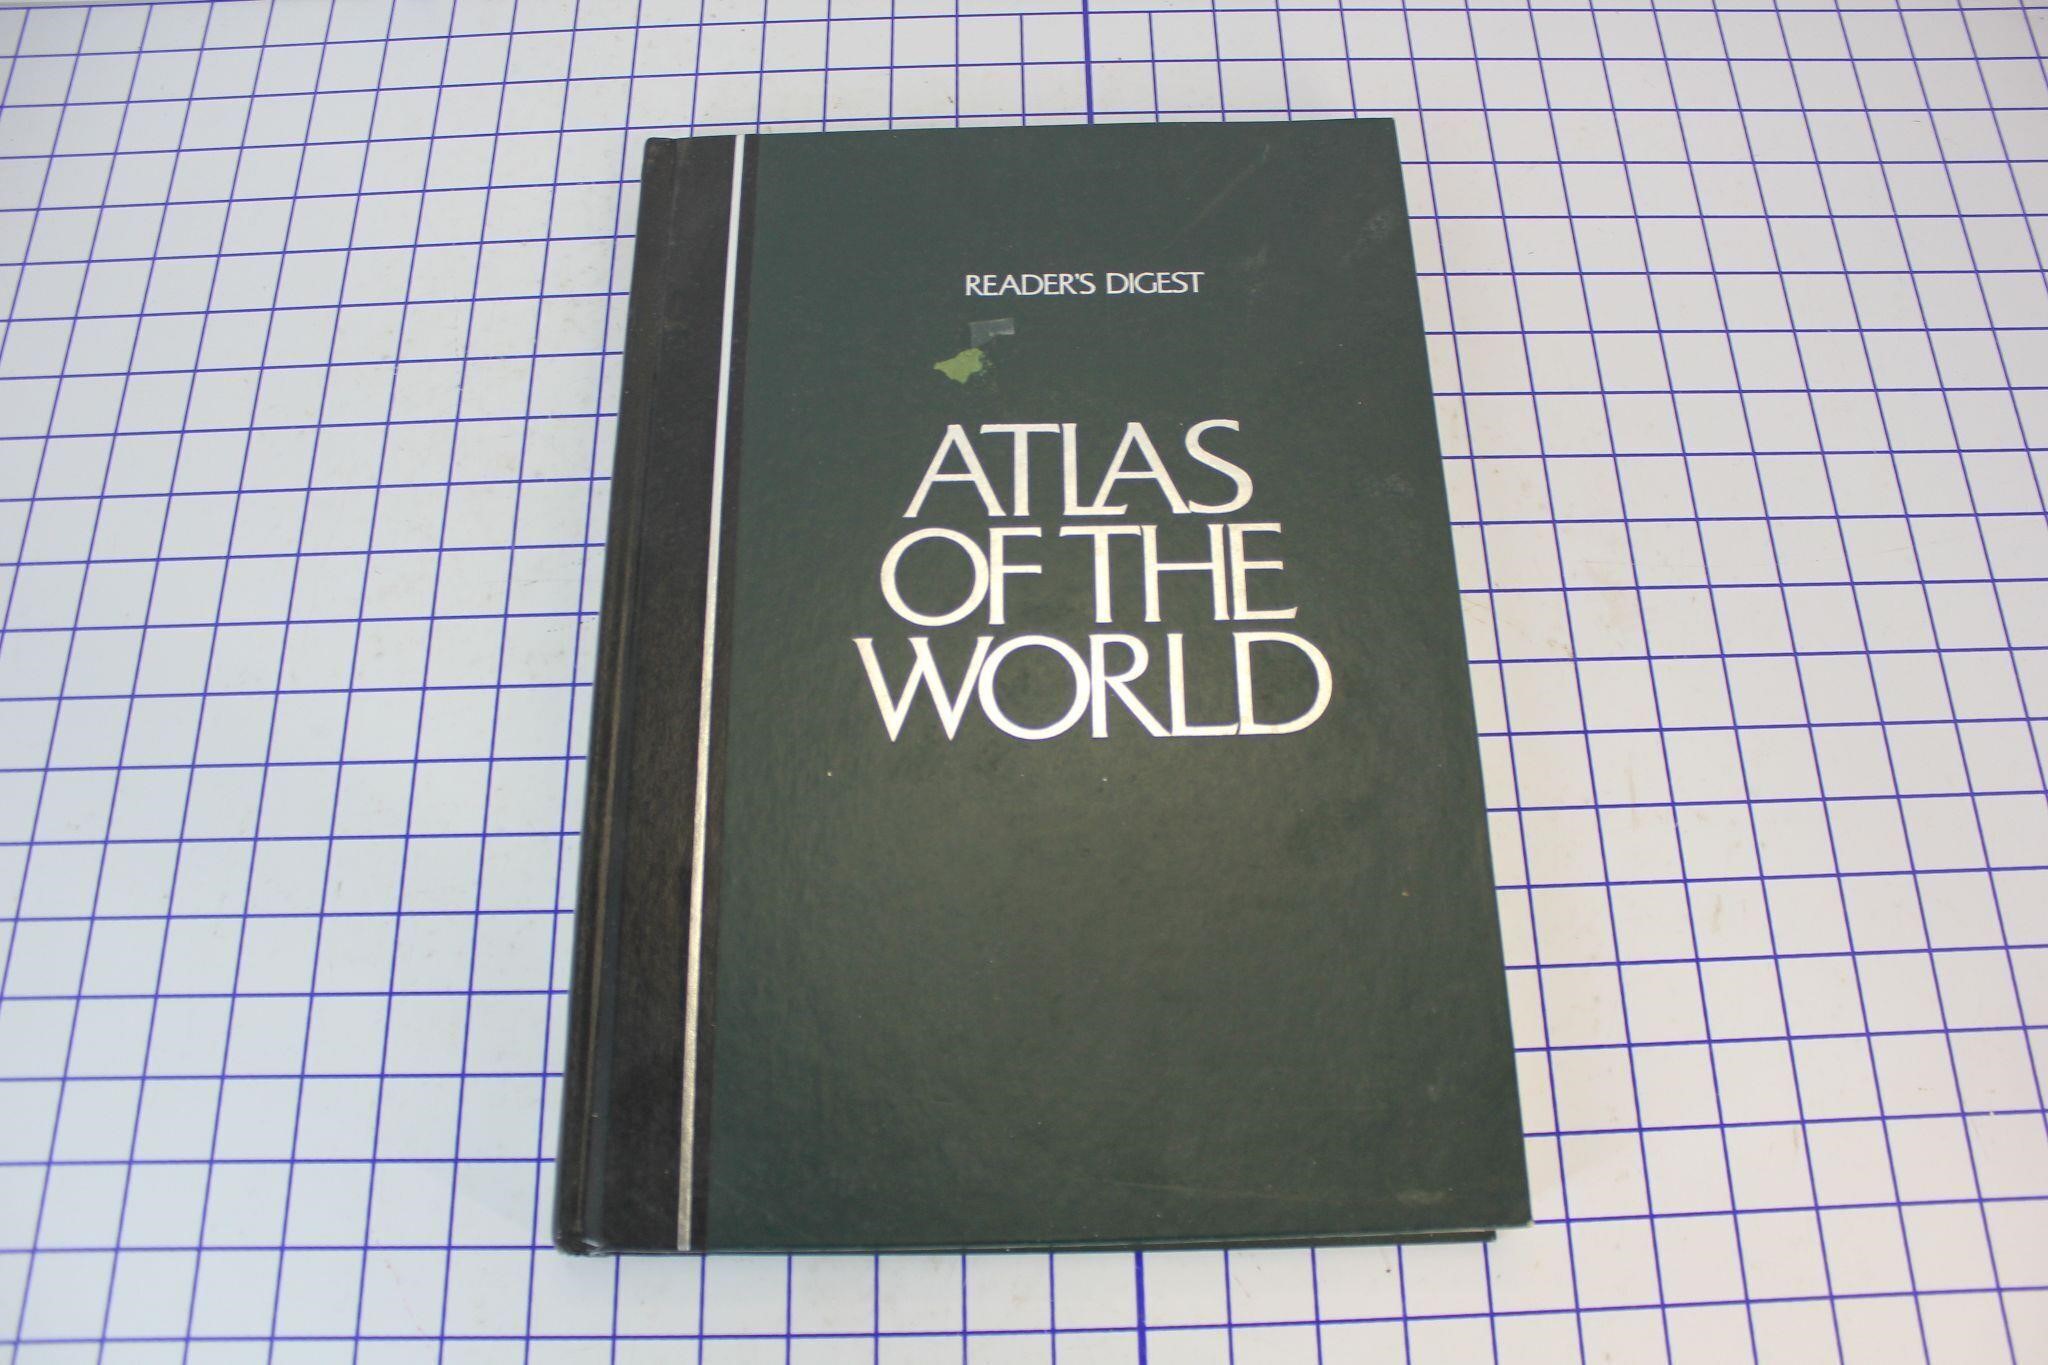 READERS DIGEST ATLAS OF THE WORLD BOOK